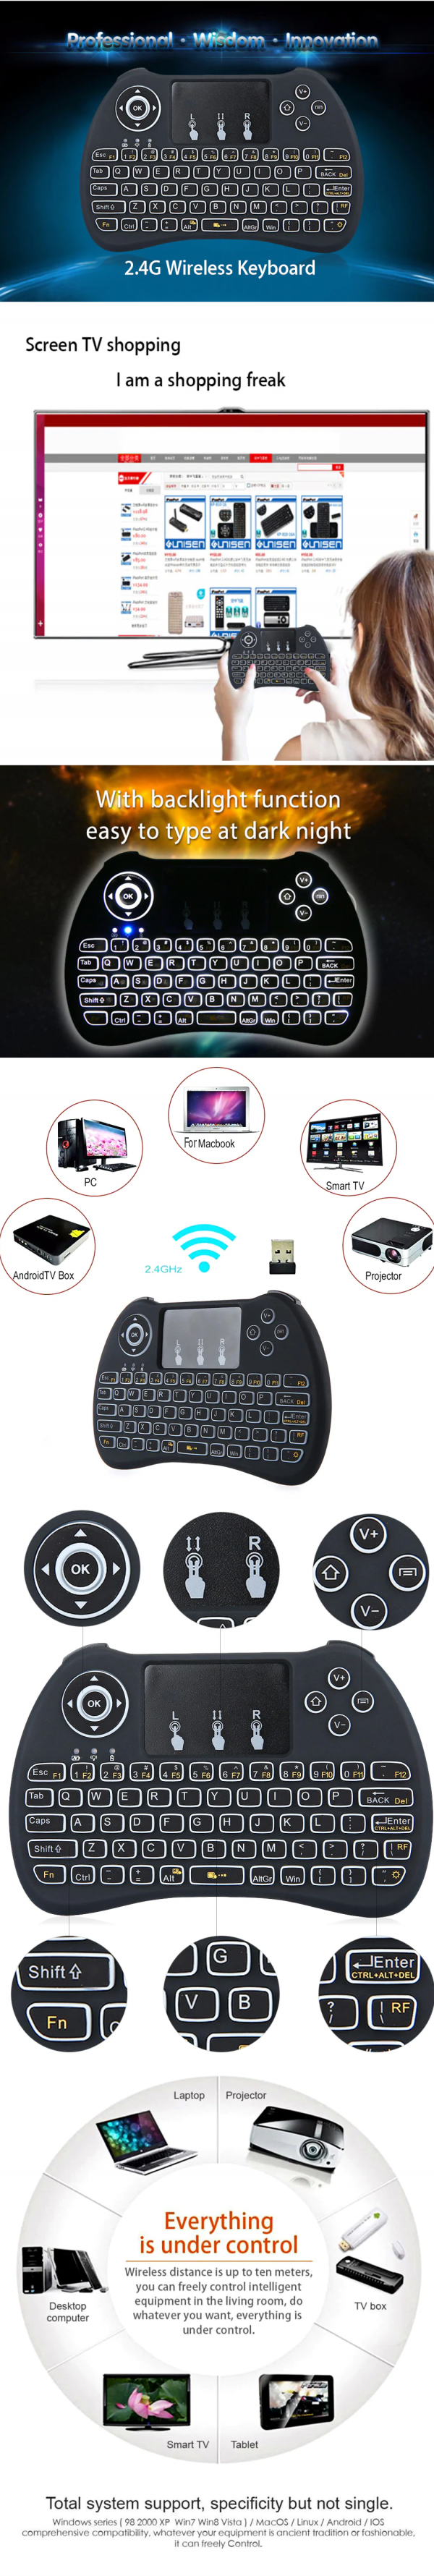 Hand-held Wireless QWERTY Keyboard with Backlight H9 Mini, black-8248